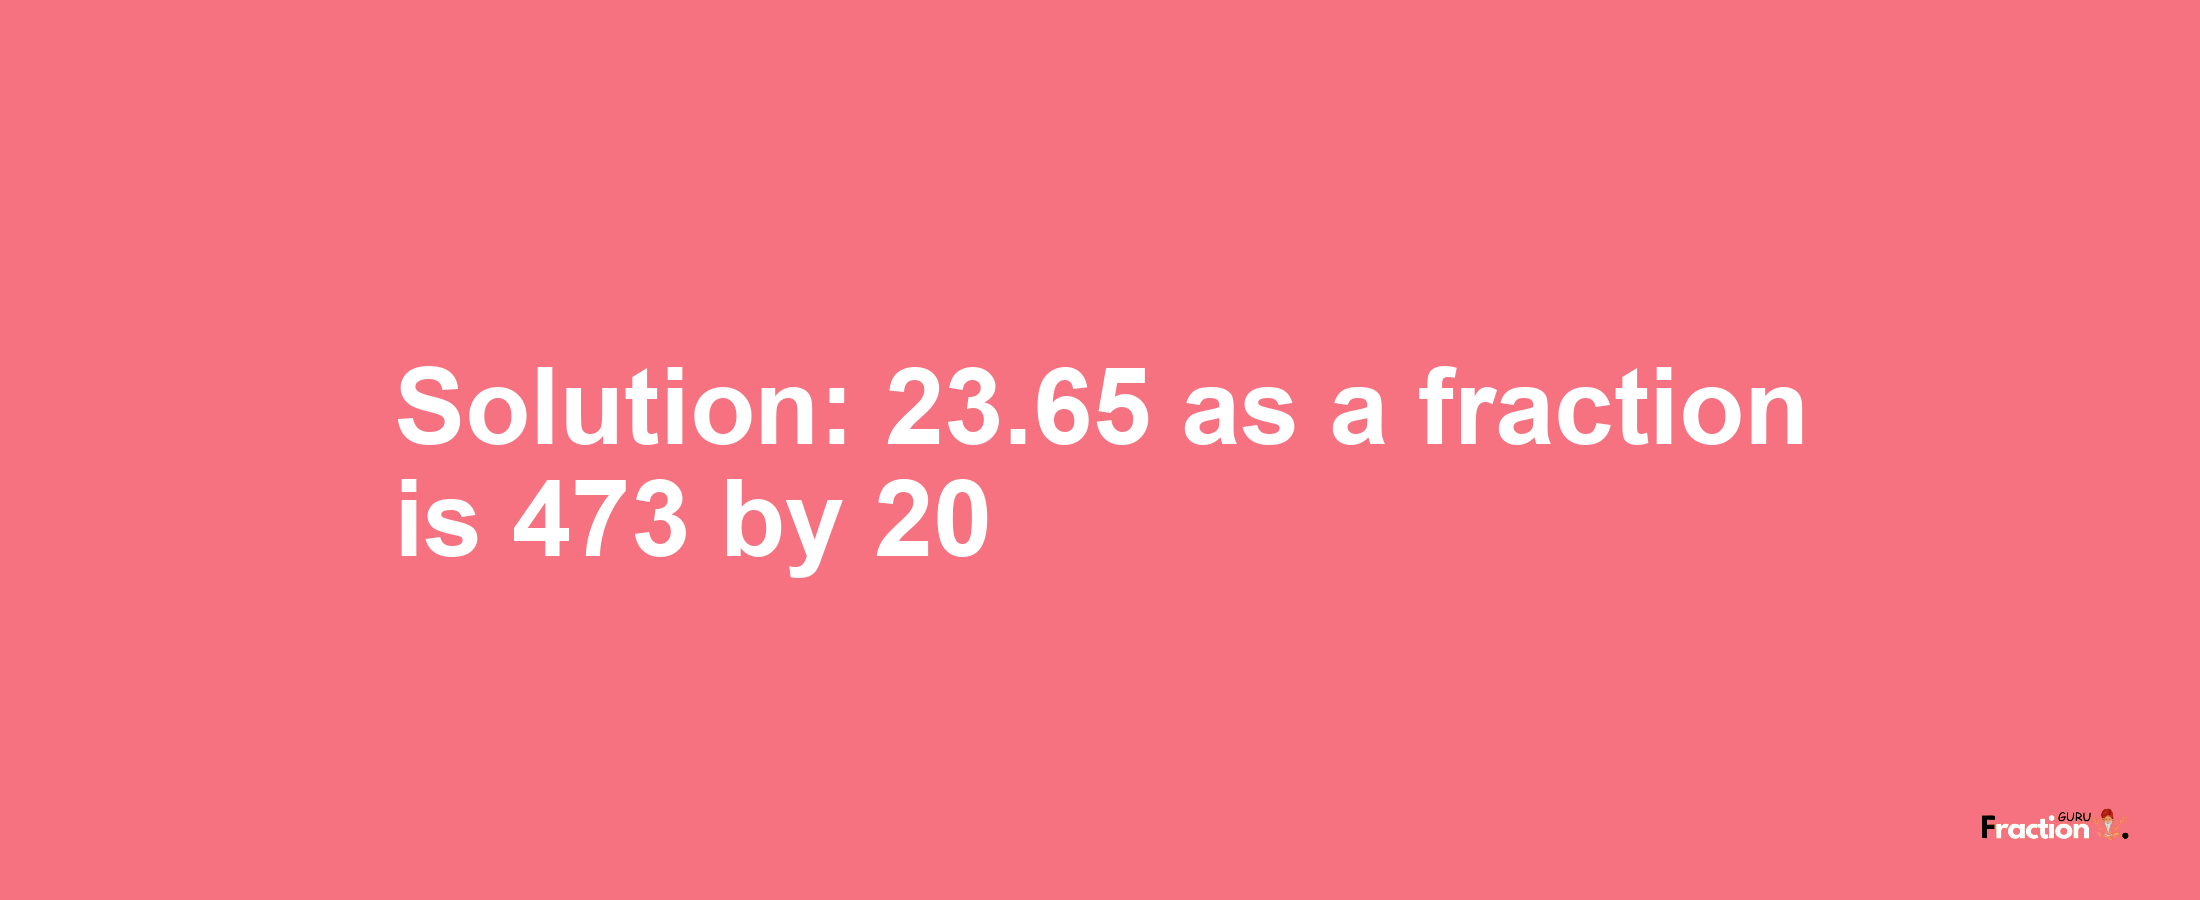 Solution:23.65 as a fraction is 473/20